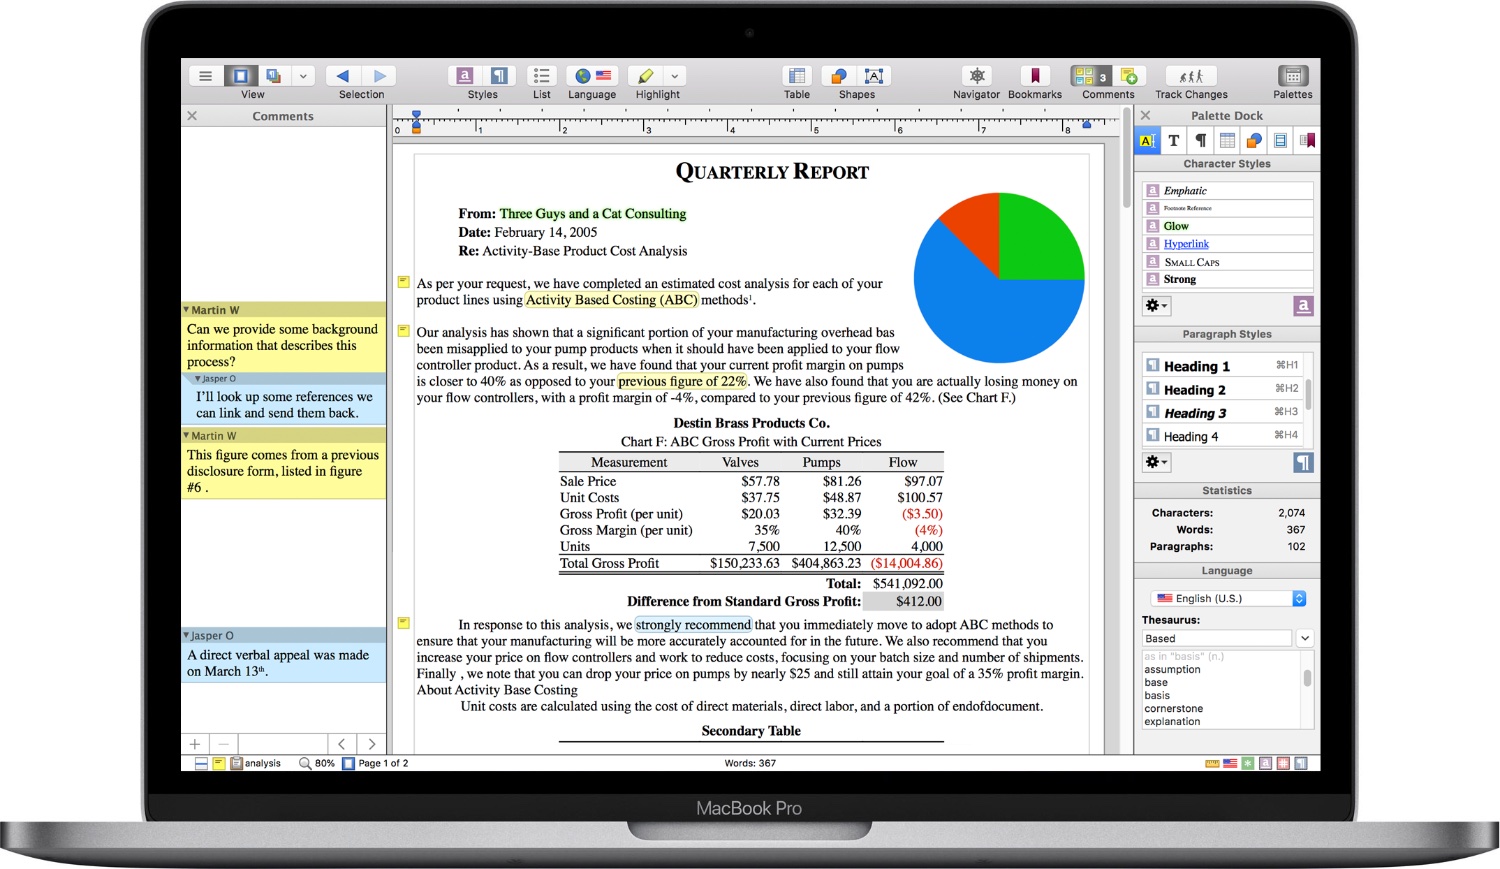 Nisus Writer Pro for the Mac updated to version 3